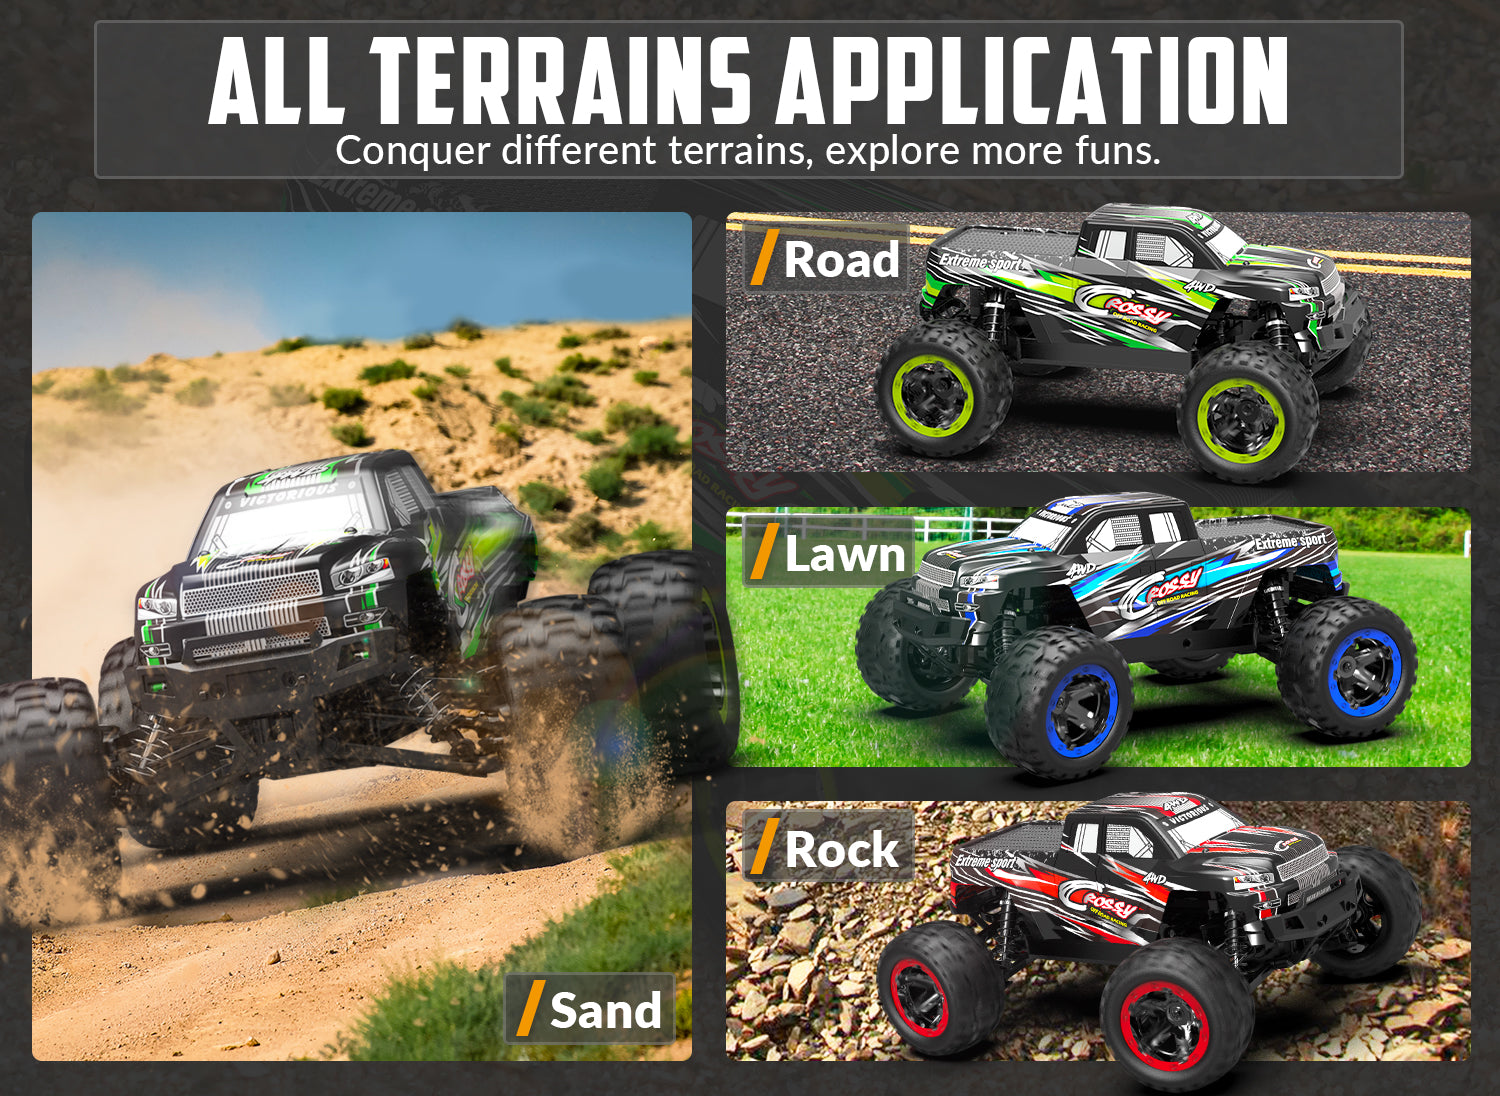 Crossy 1:16 Scale High Speed All Terrain RC Car | VOLANTEXRC OFFICIAL